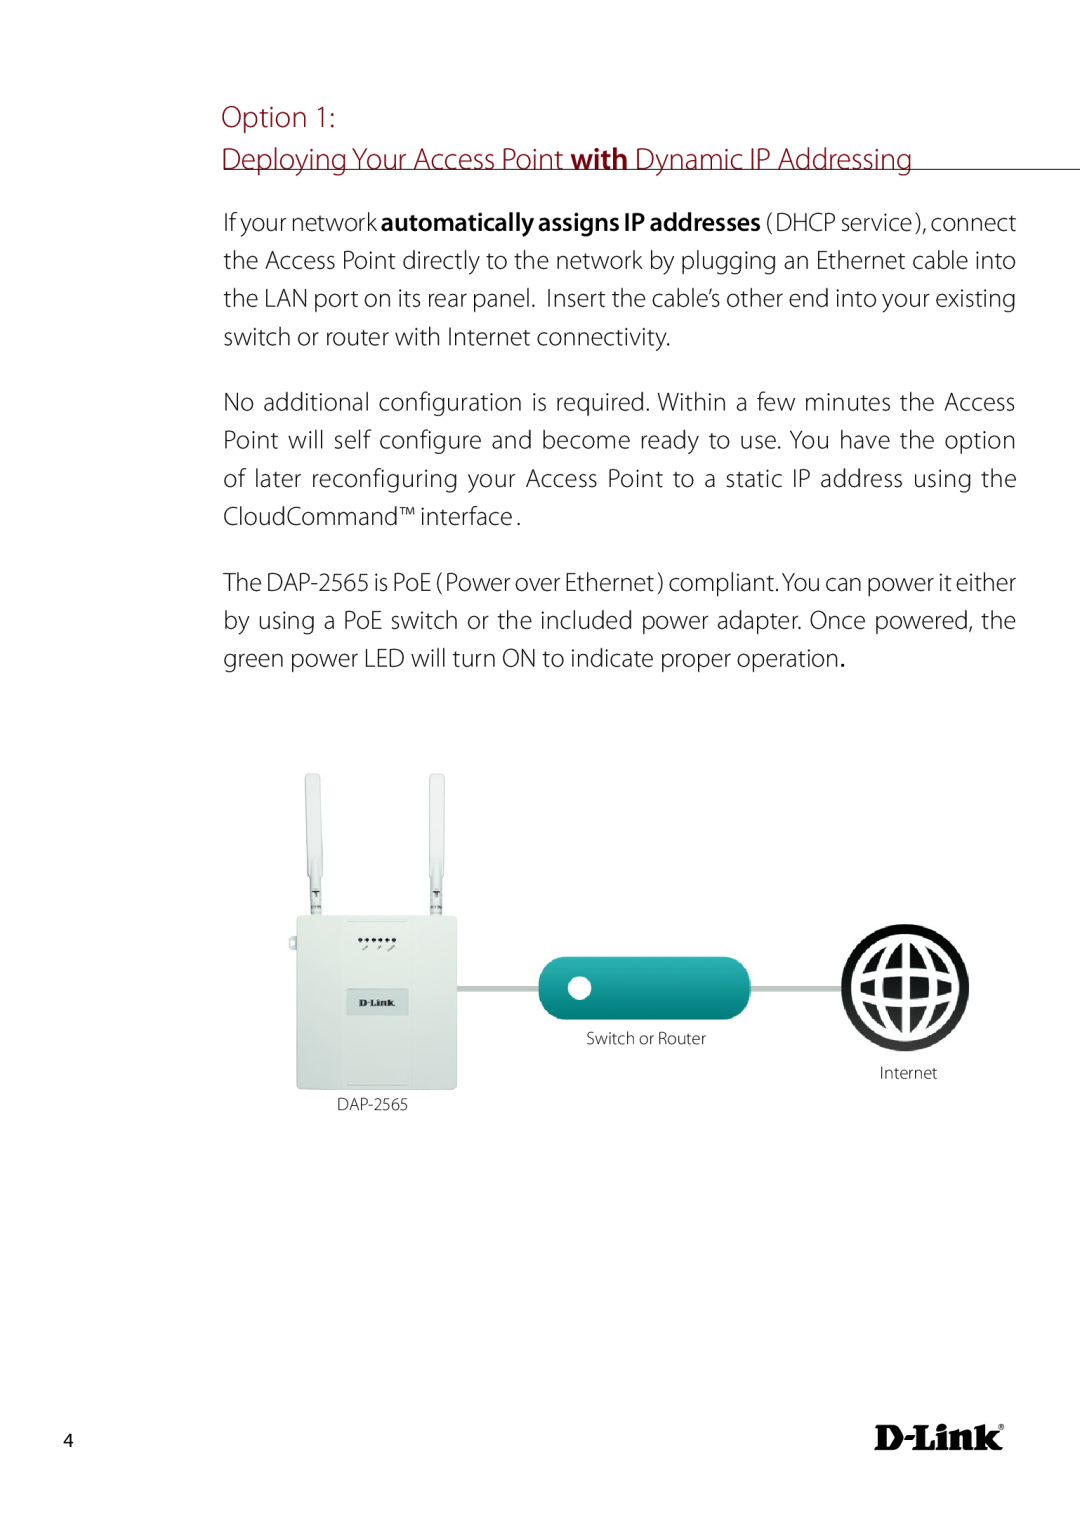 D-Link airpremier n dual band poe access point manual Option Deploying Your Access Point with Dynamic IP Addressing 